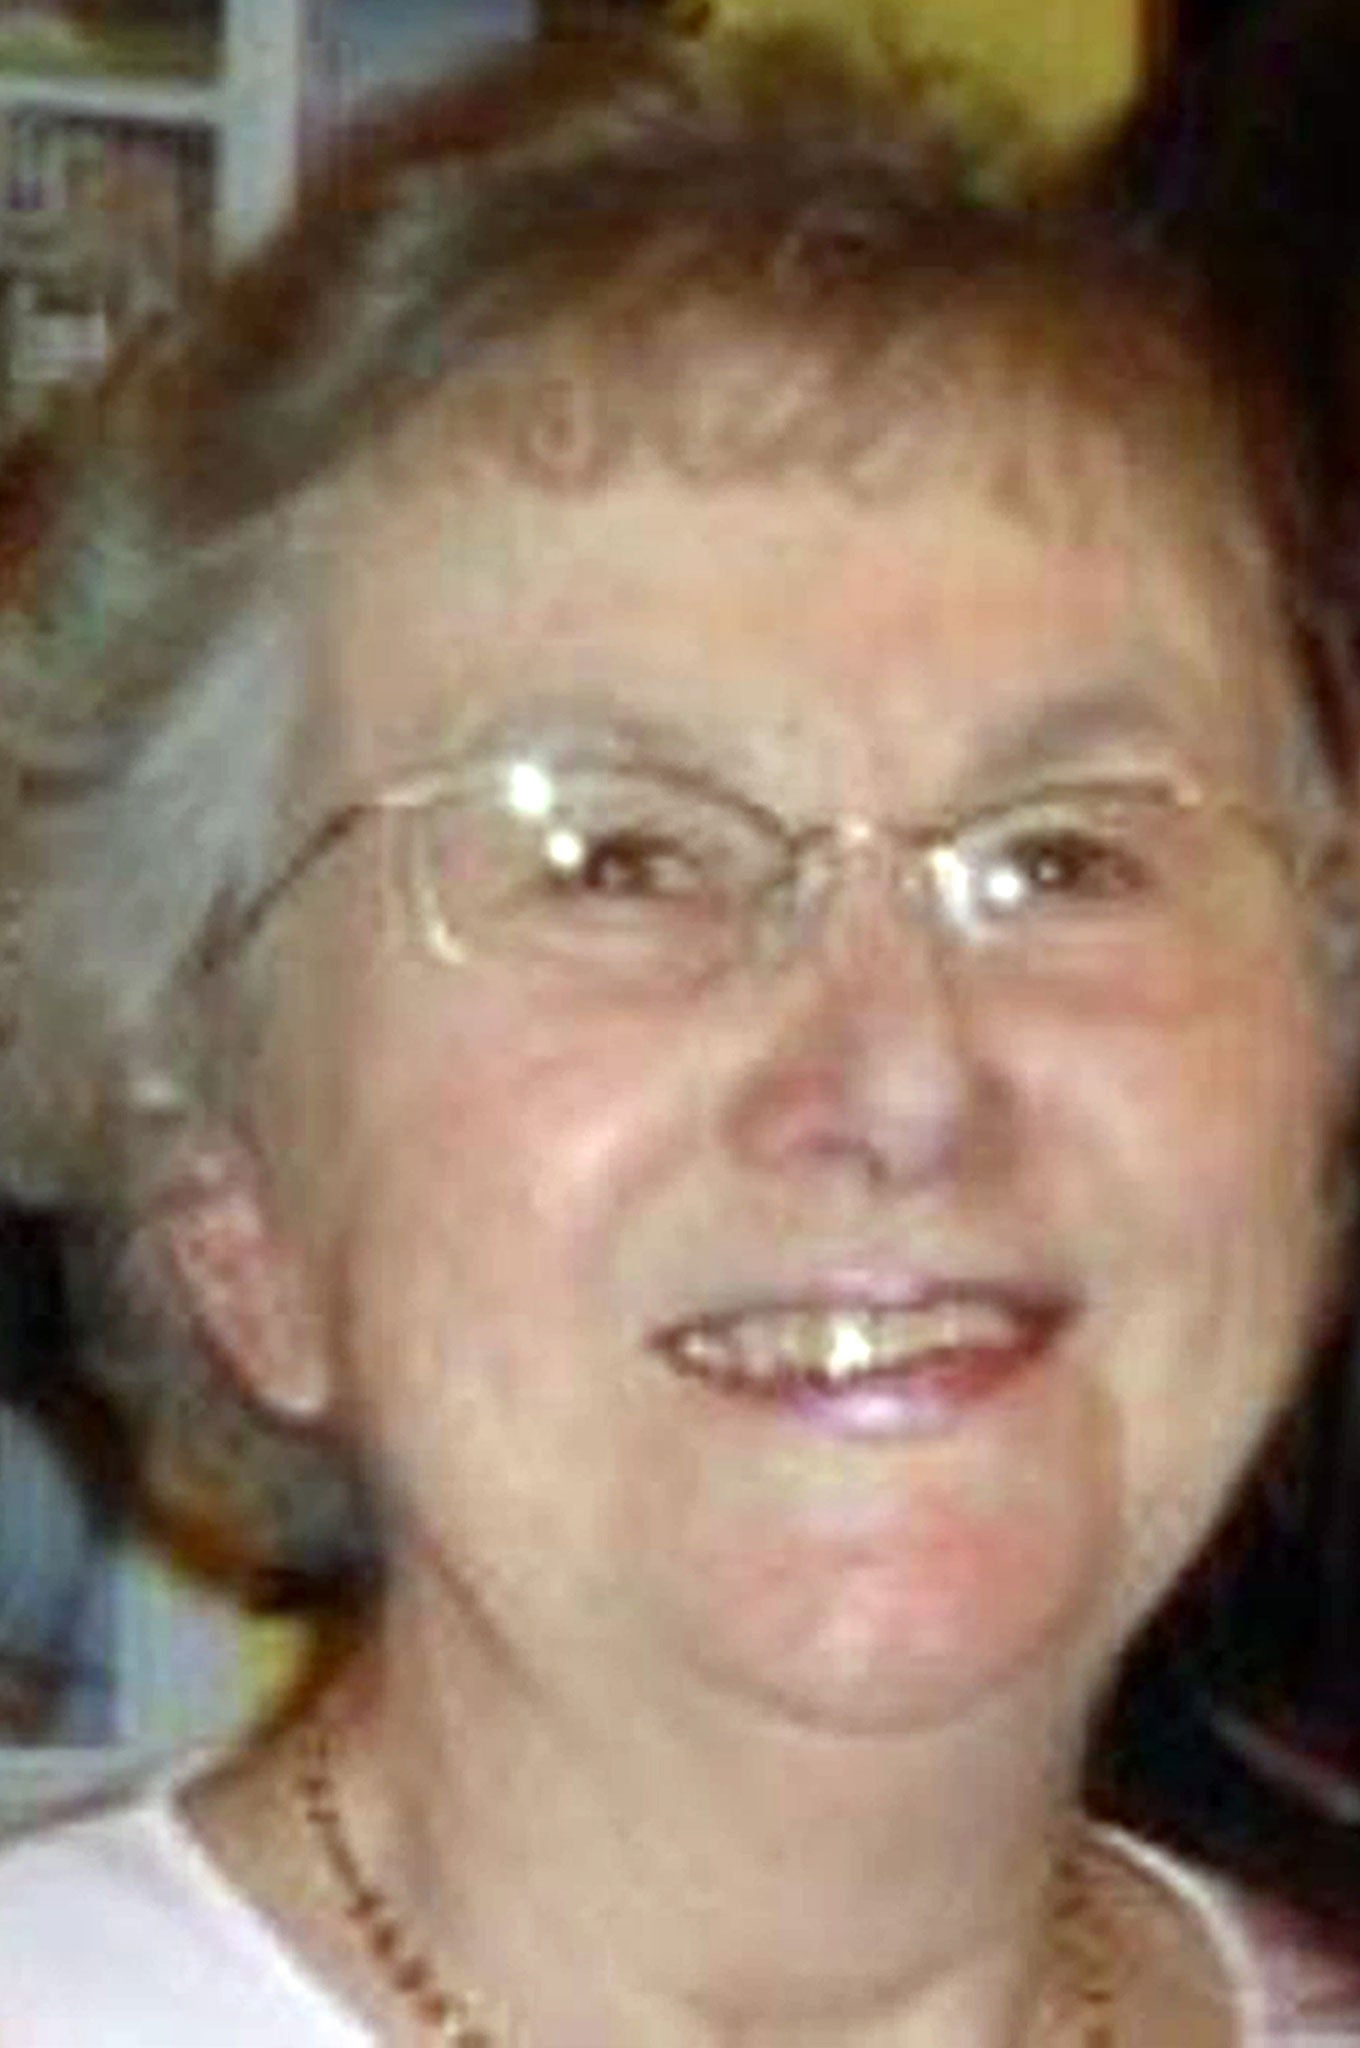 80-year-old murdered pensioner Cynthia Beamond